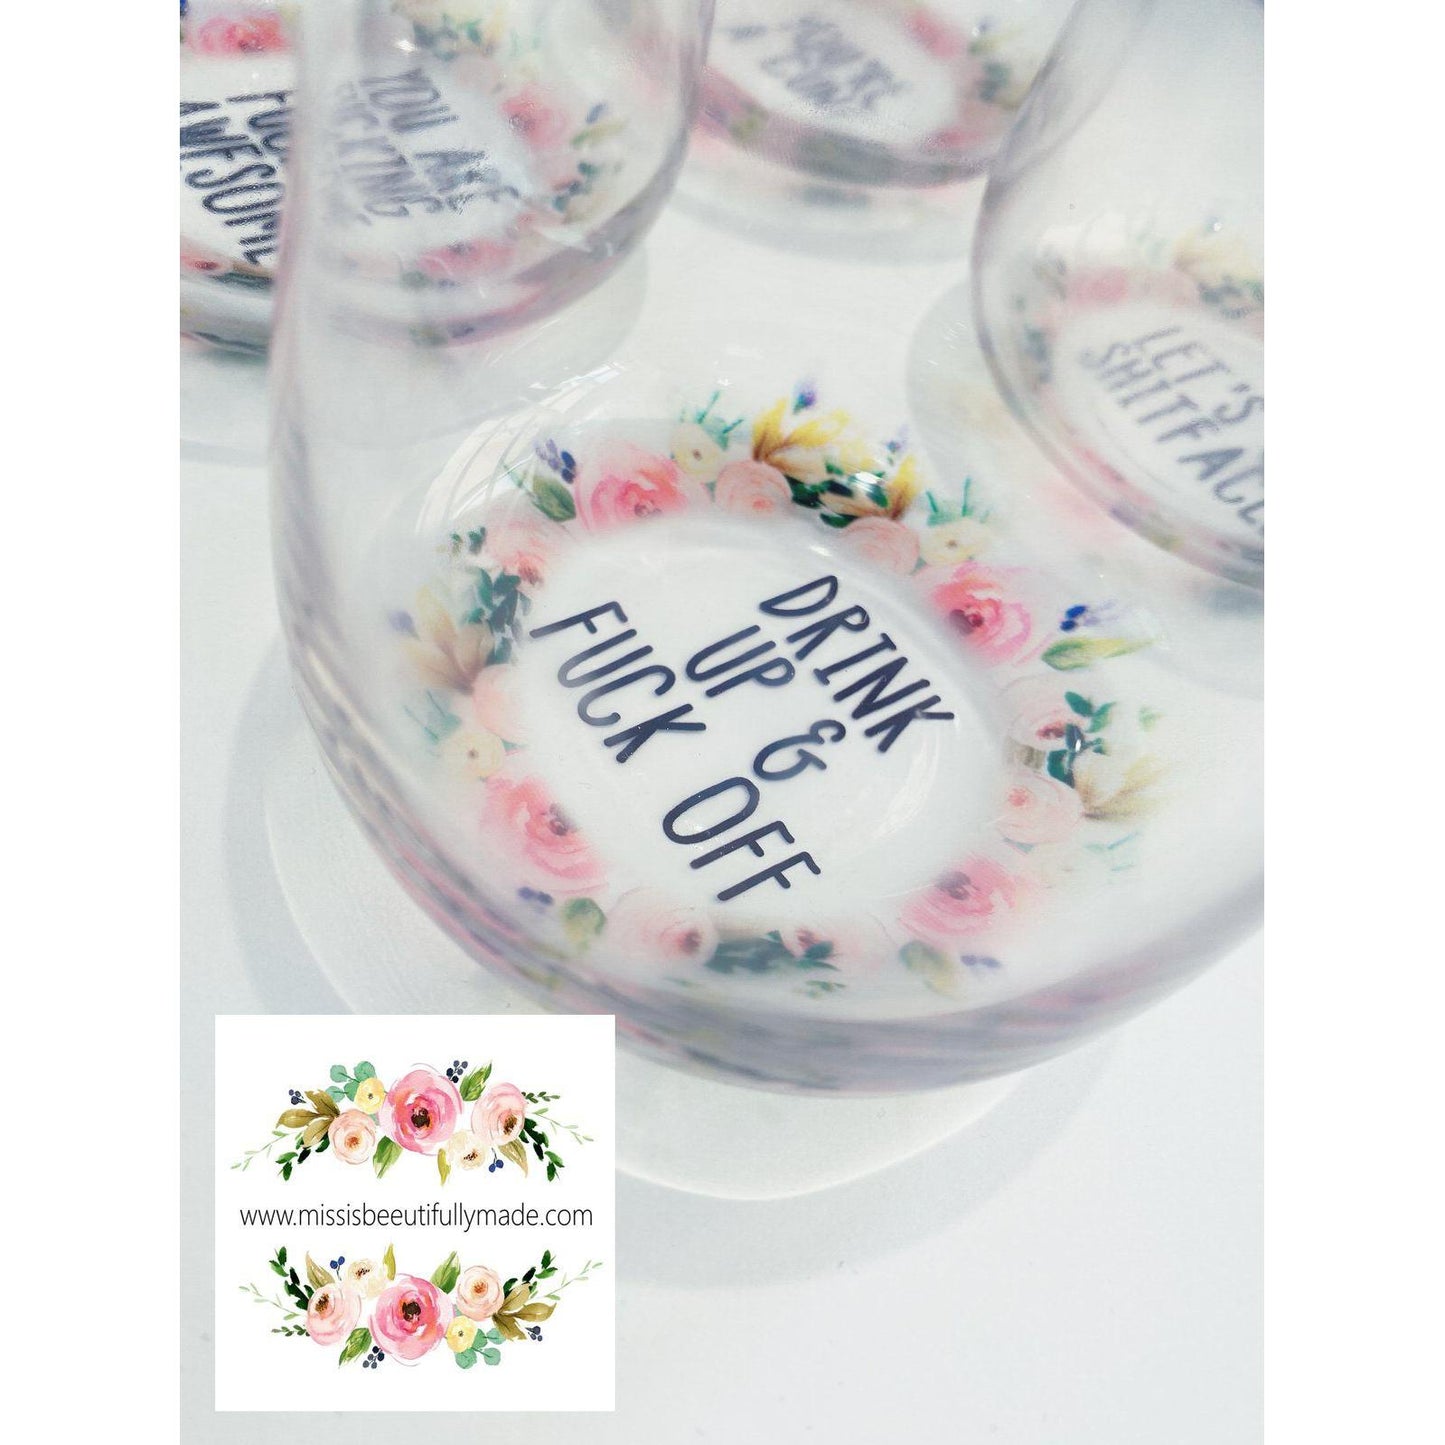 4 pack of stemless wine glasses with a beautiful floral print underneath.. The quotes on them are Drink up & fuck off, You're a cunt, Let's get shit faced, You are fucking awesome. You can have all 4 designs are select which ones you want from the list. Hand wash only